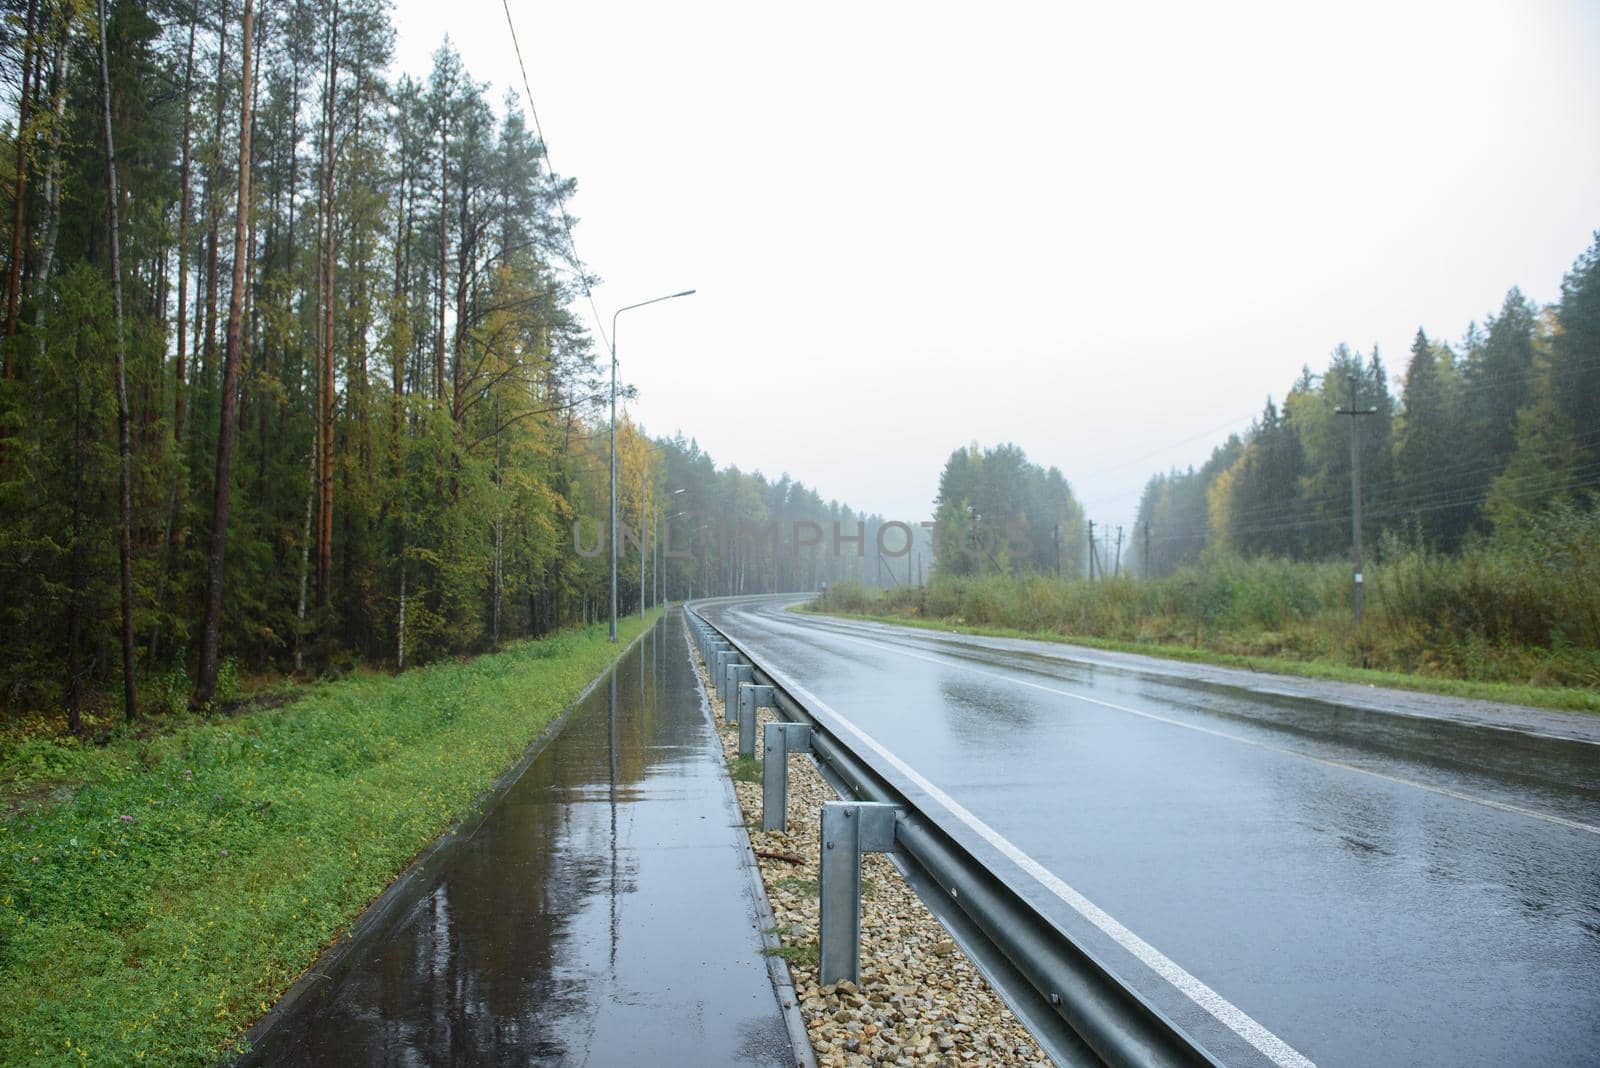 A road section with a pedestrian path located along it by rainy weather